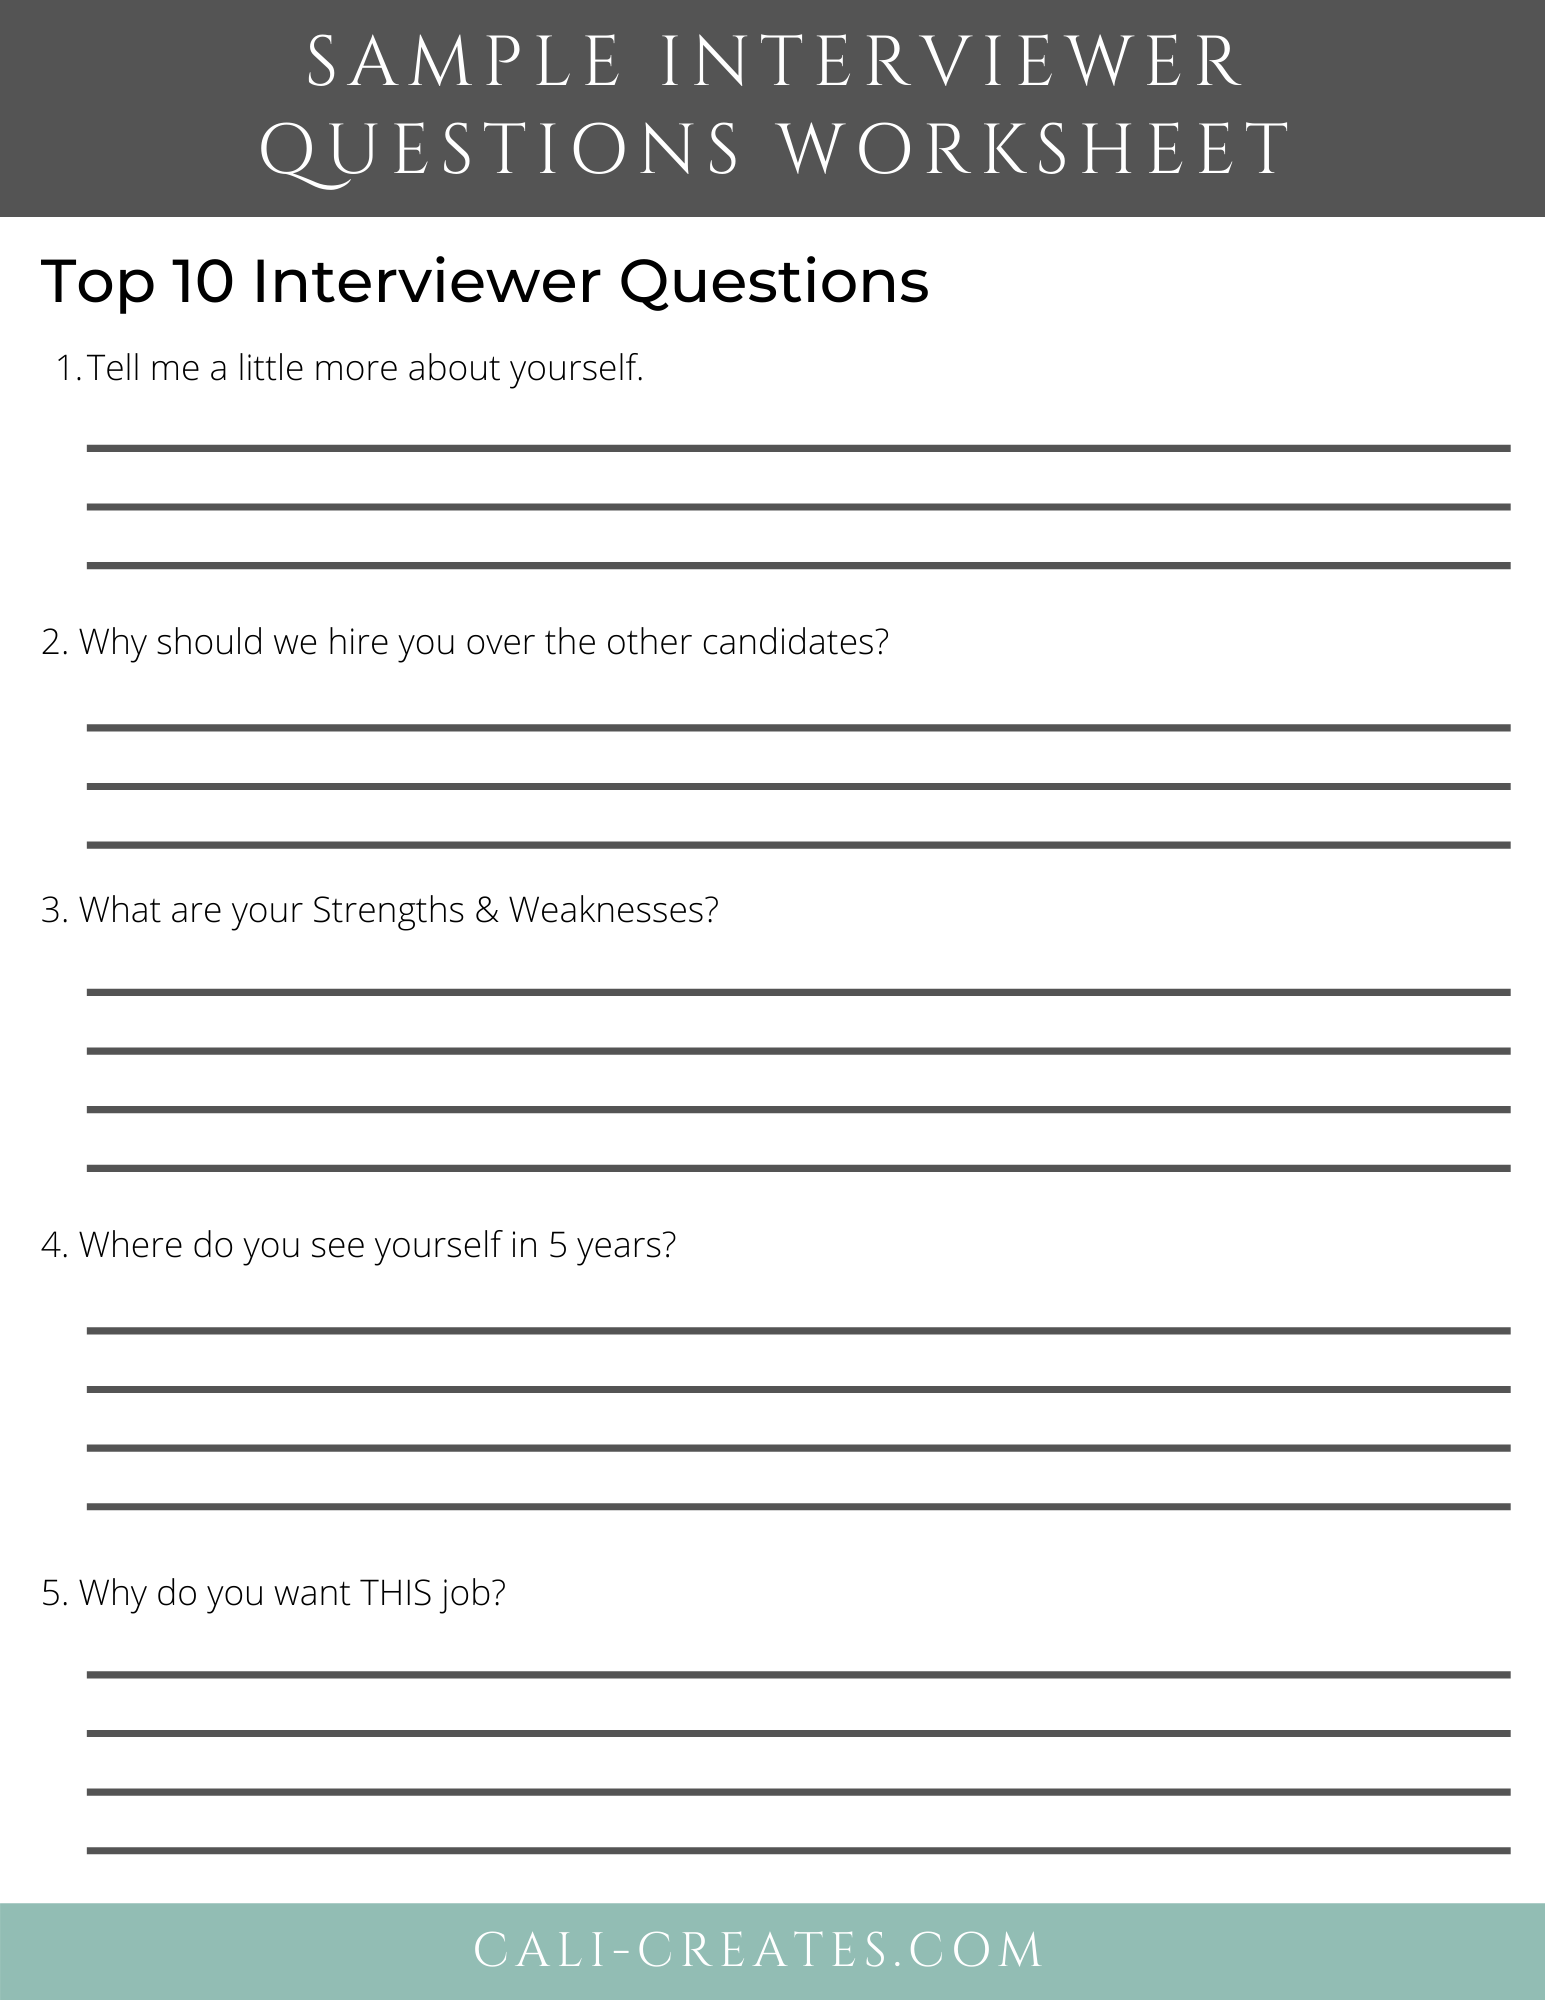 Sample Interview Questions Worksheet | How to Nail a Job Interview